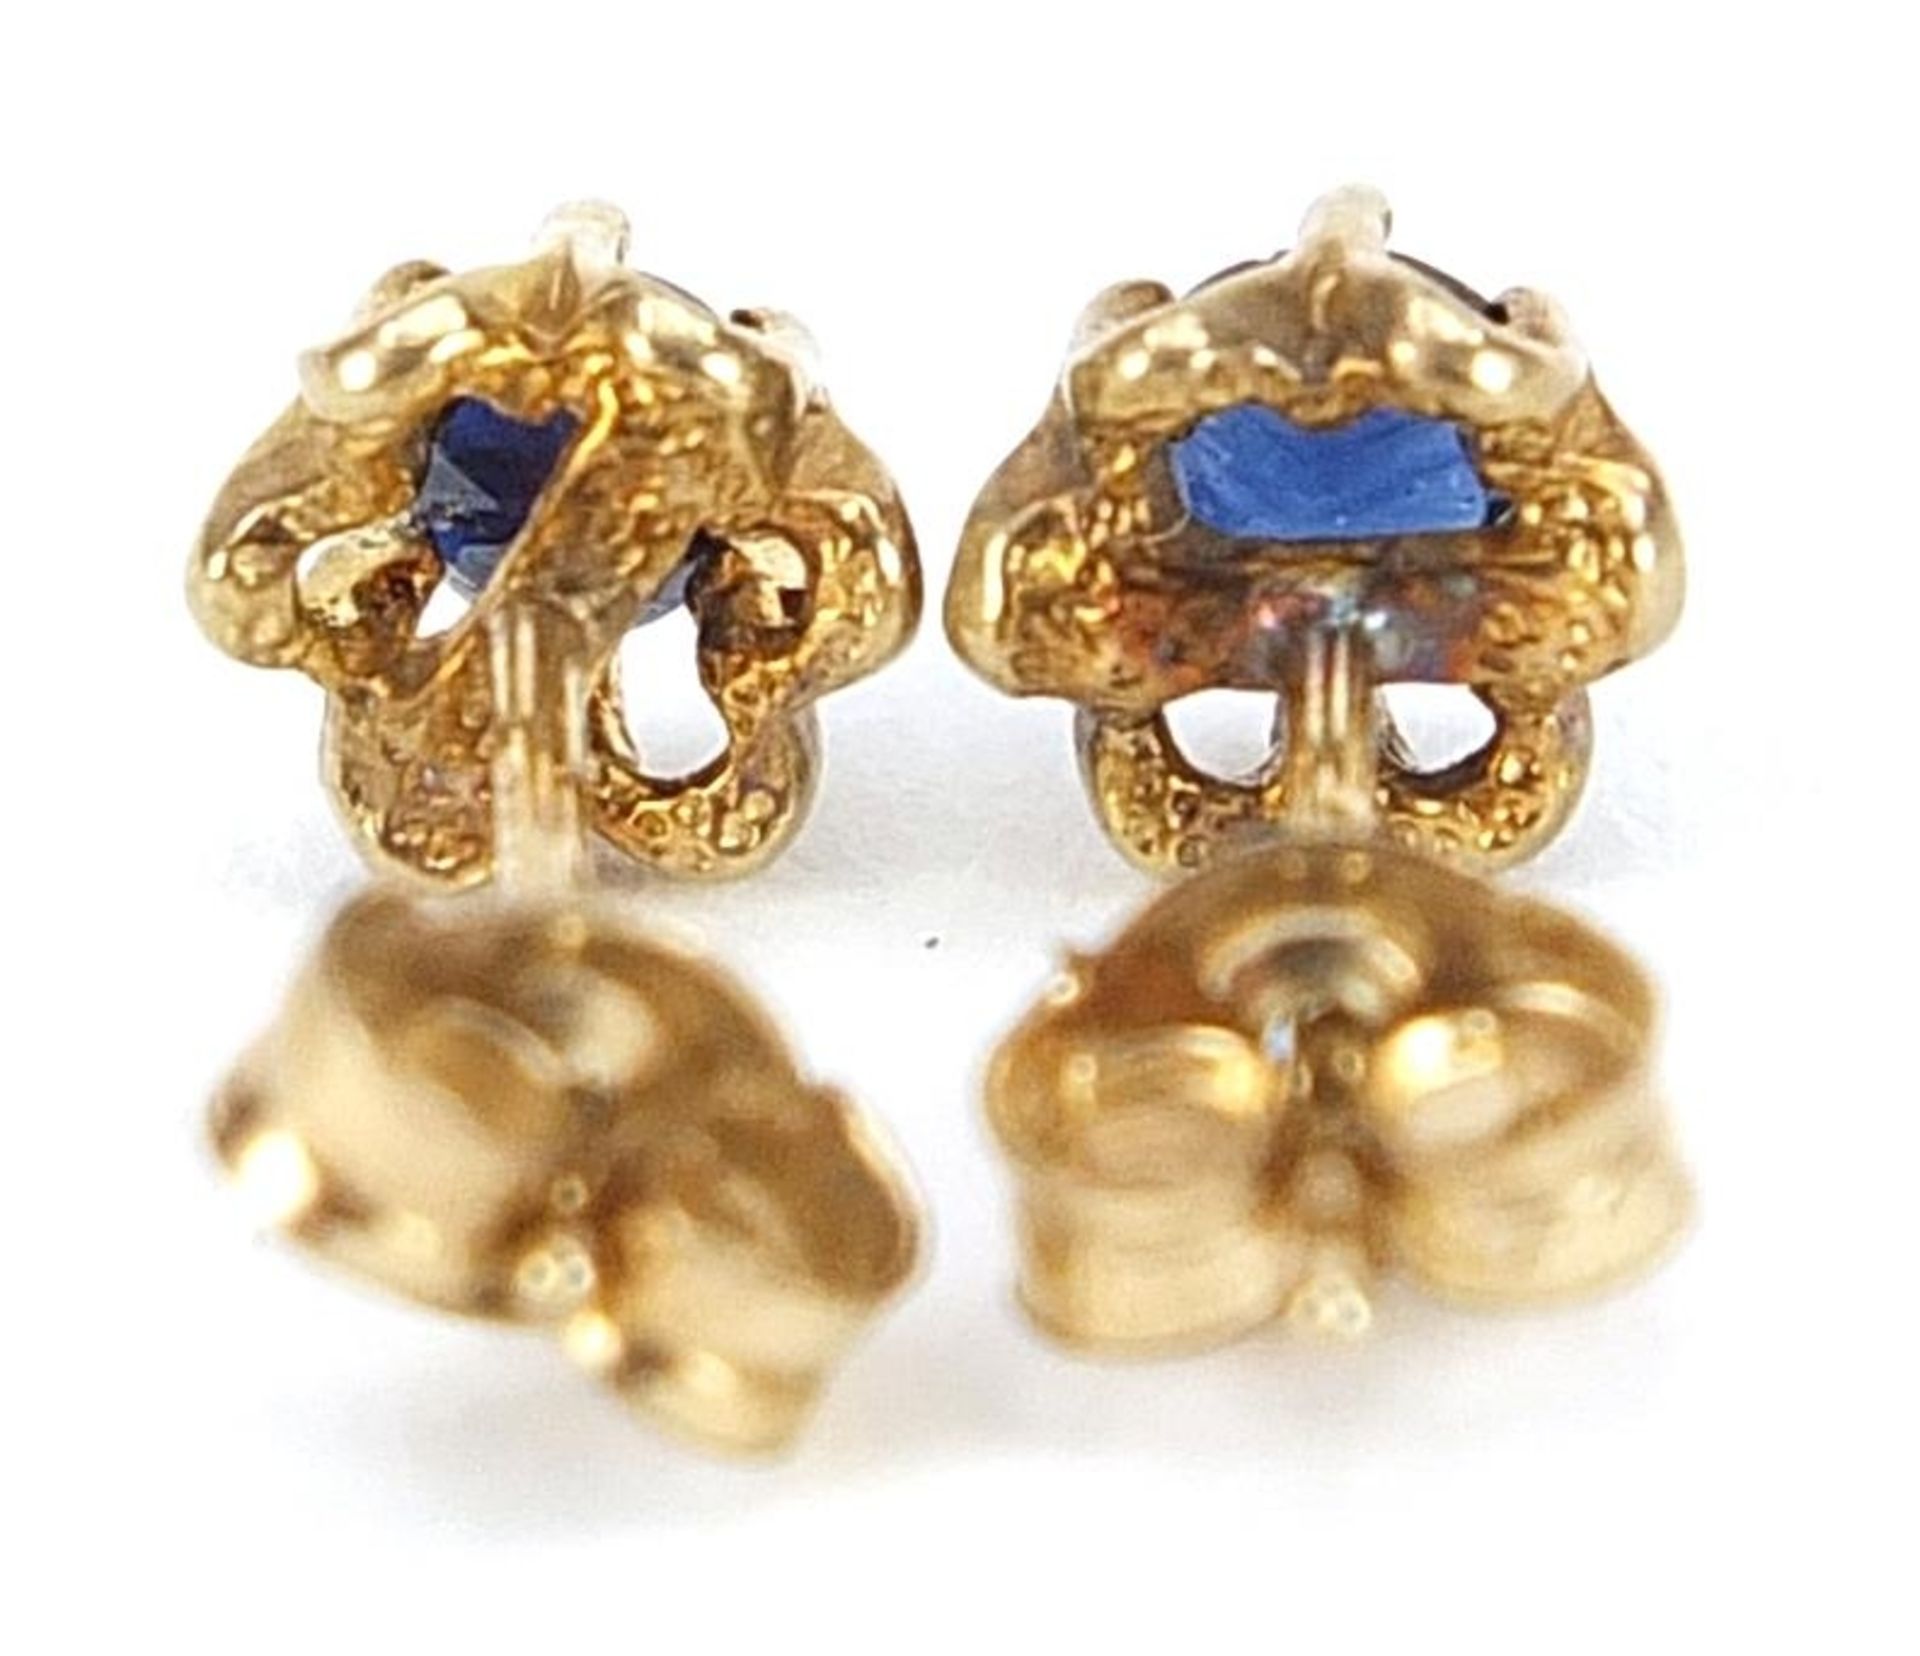 Pair of 9ct gold sapphire solitaire stud earrings, 4.5mm in diameter, 0.8g - Image 2 of 2